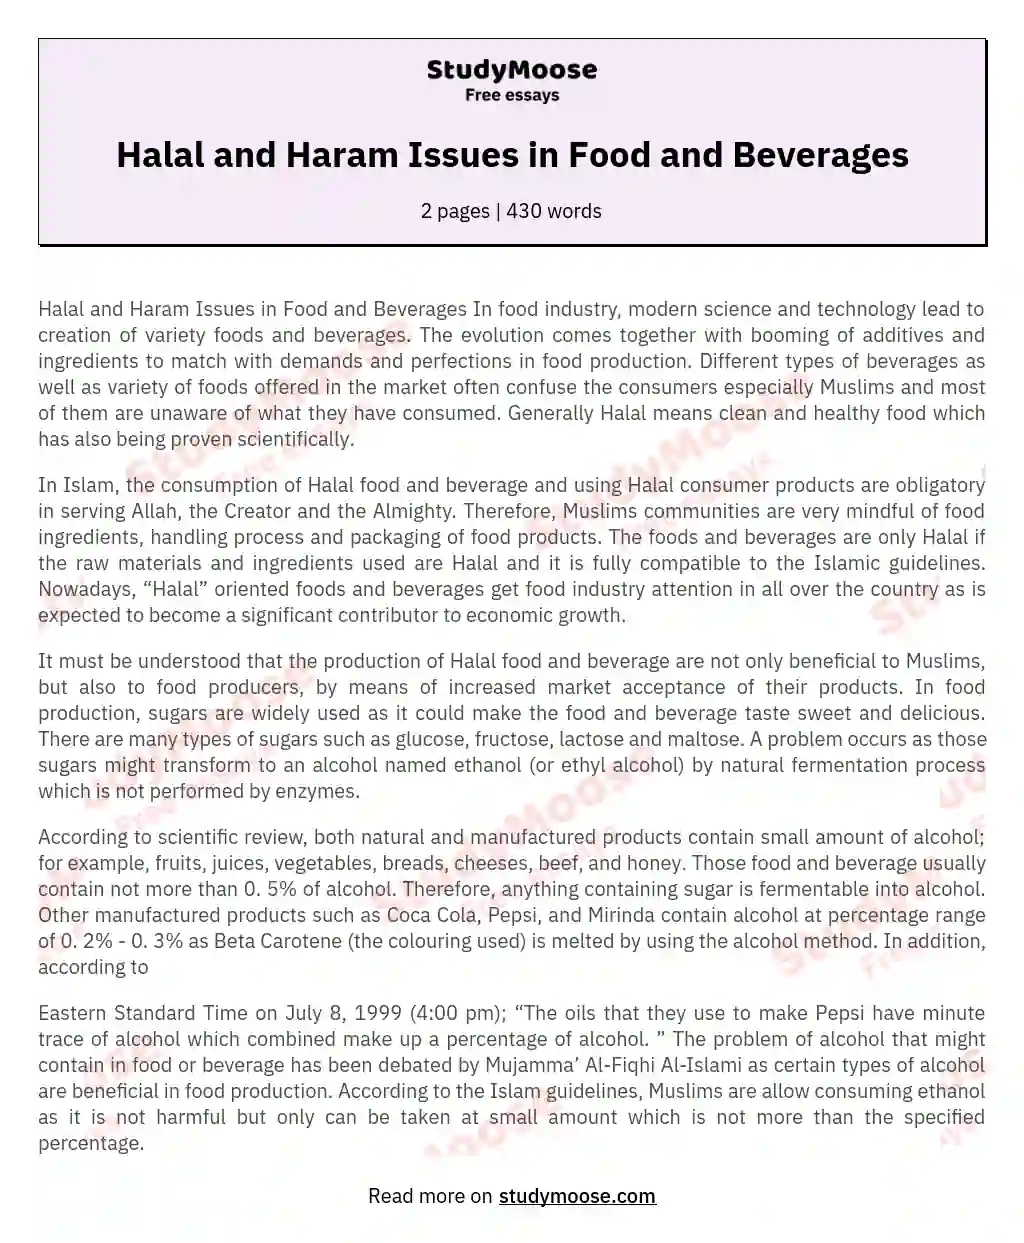 Halal and Haram Issues in Food and Beverages essay